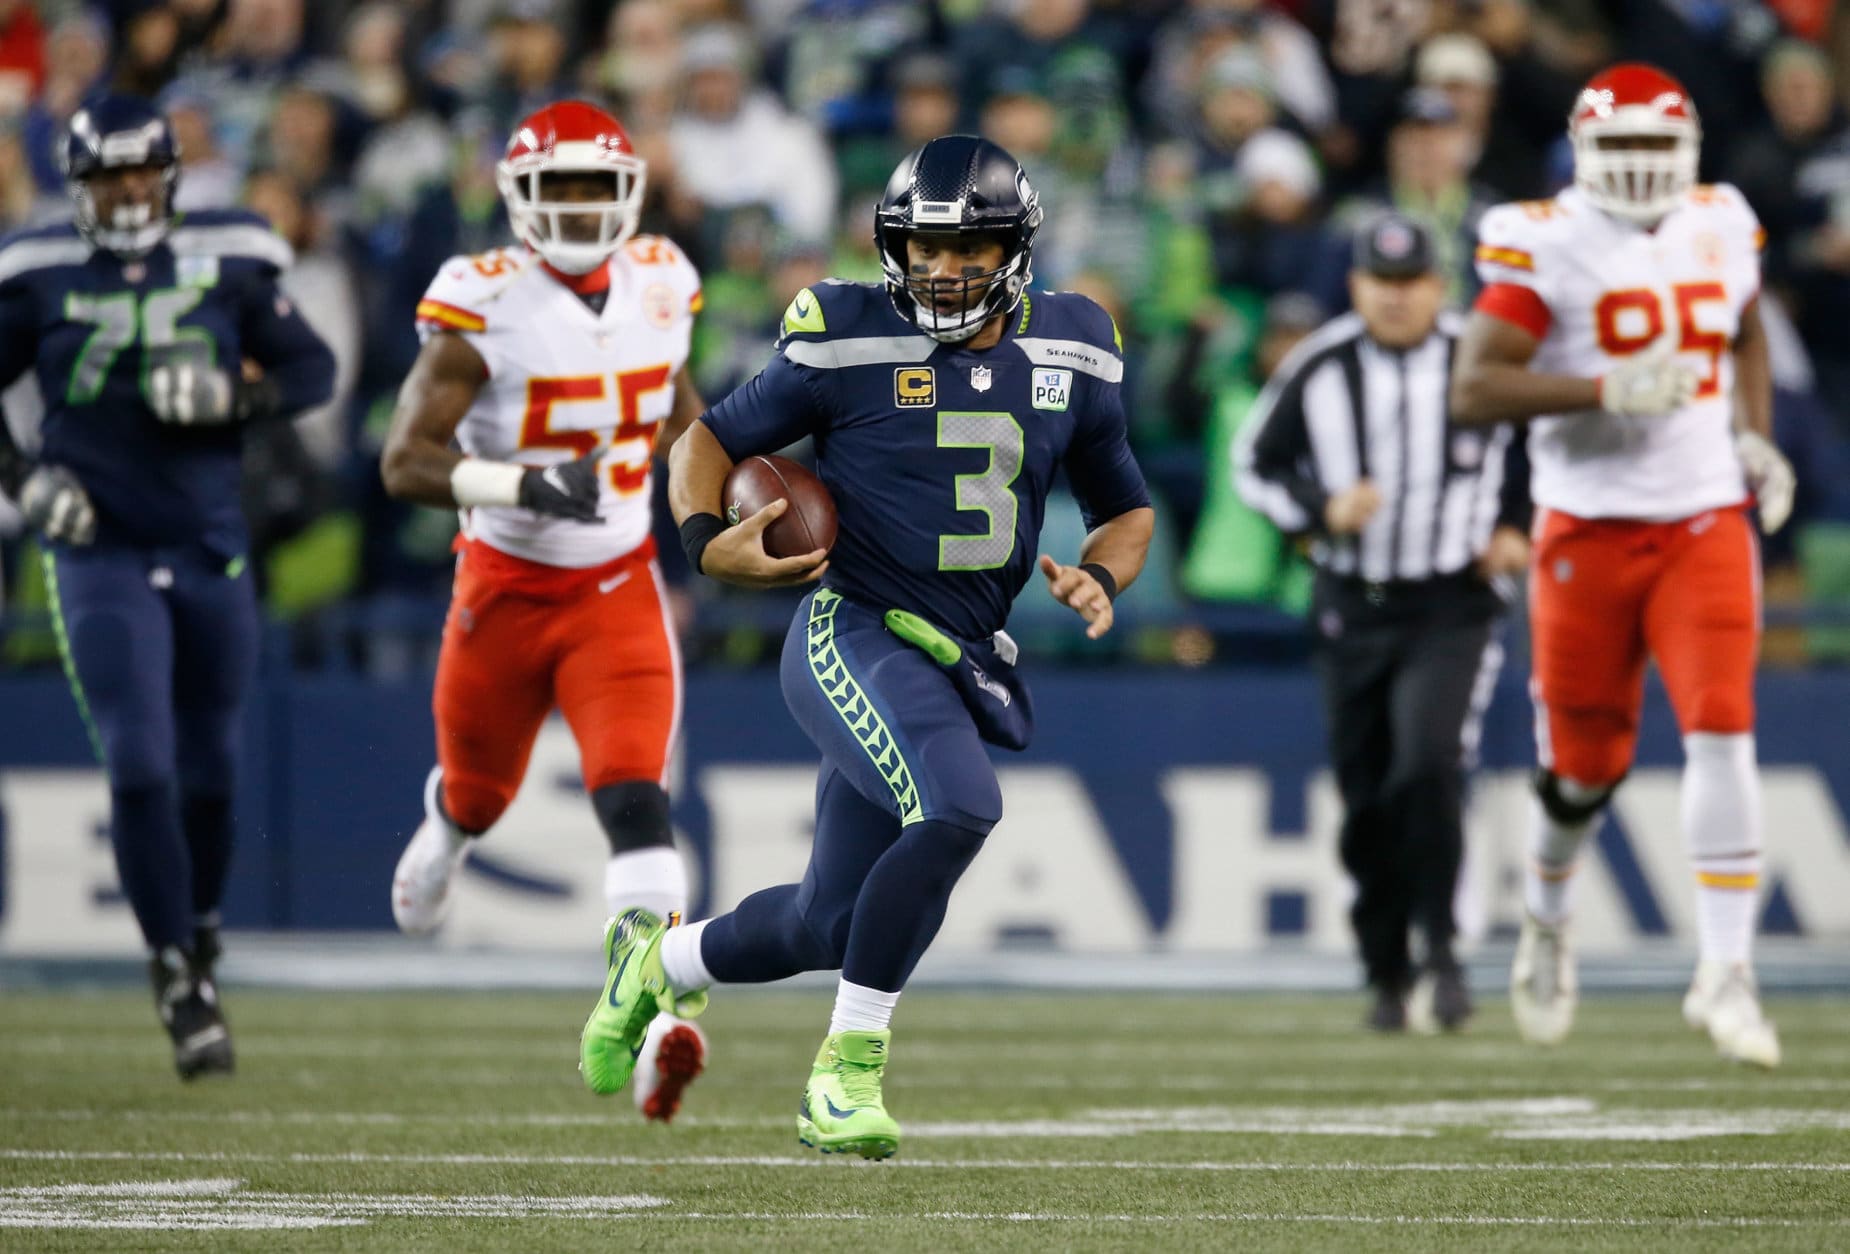 SEATTLE, WA - DECEMBER 23:  Quarterback Russell Wilson #3 of the Seattle Seahawks rushes for a first down during the first quarter of the game against the Kansas City Chiefs at CenturyLink Field on December 23, 2018 in Seattle, Washington.  (Photo by Otto Greule Jr/Getty Images)